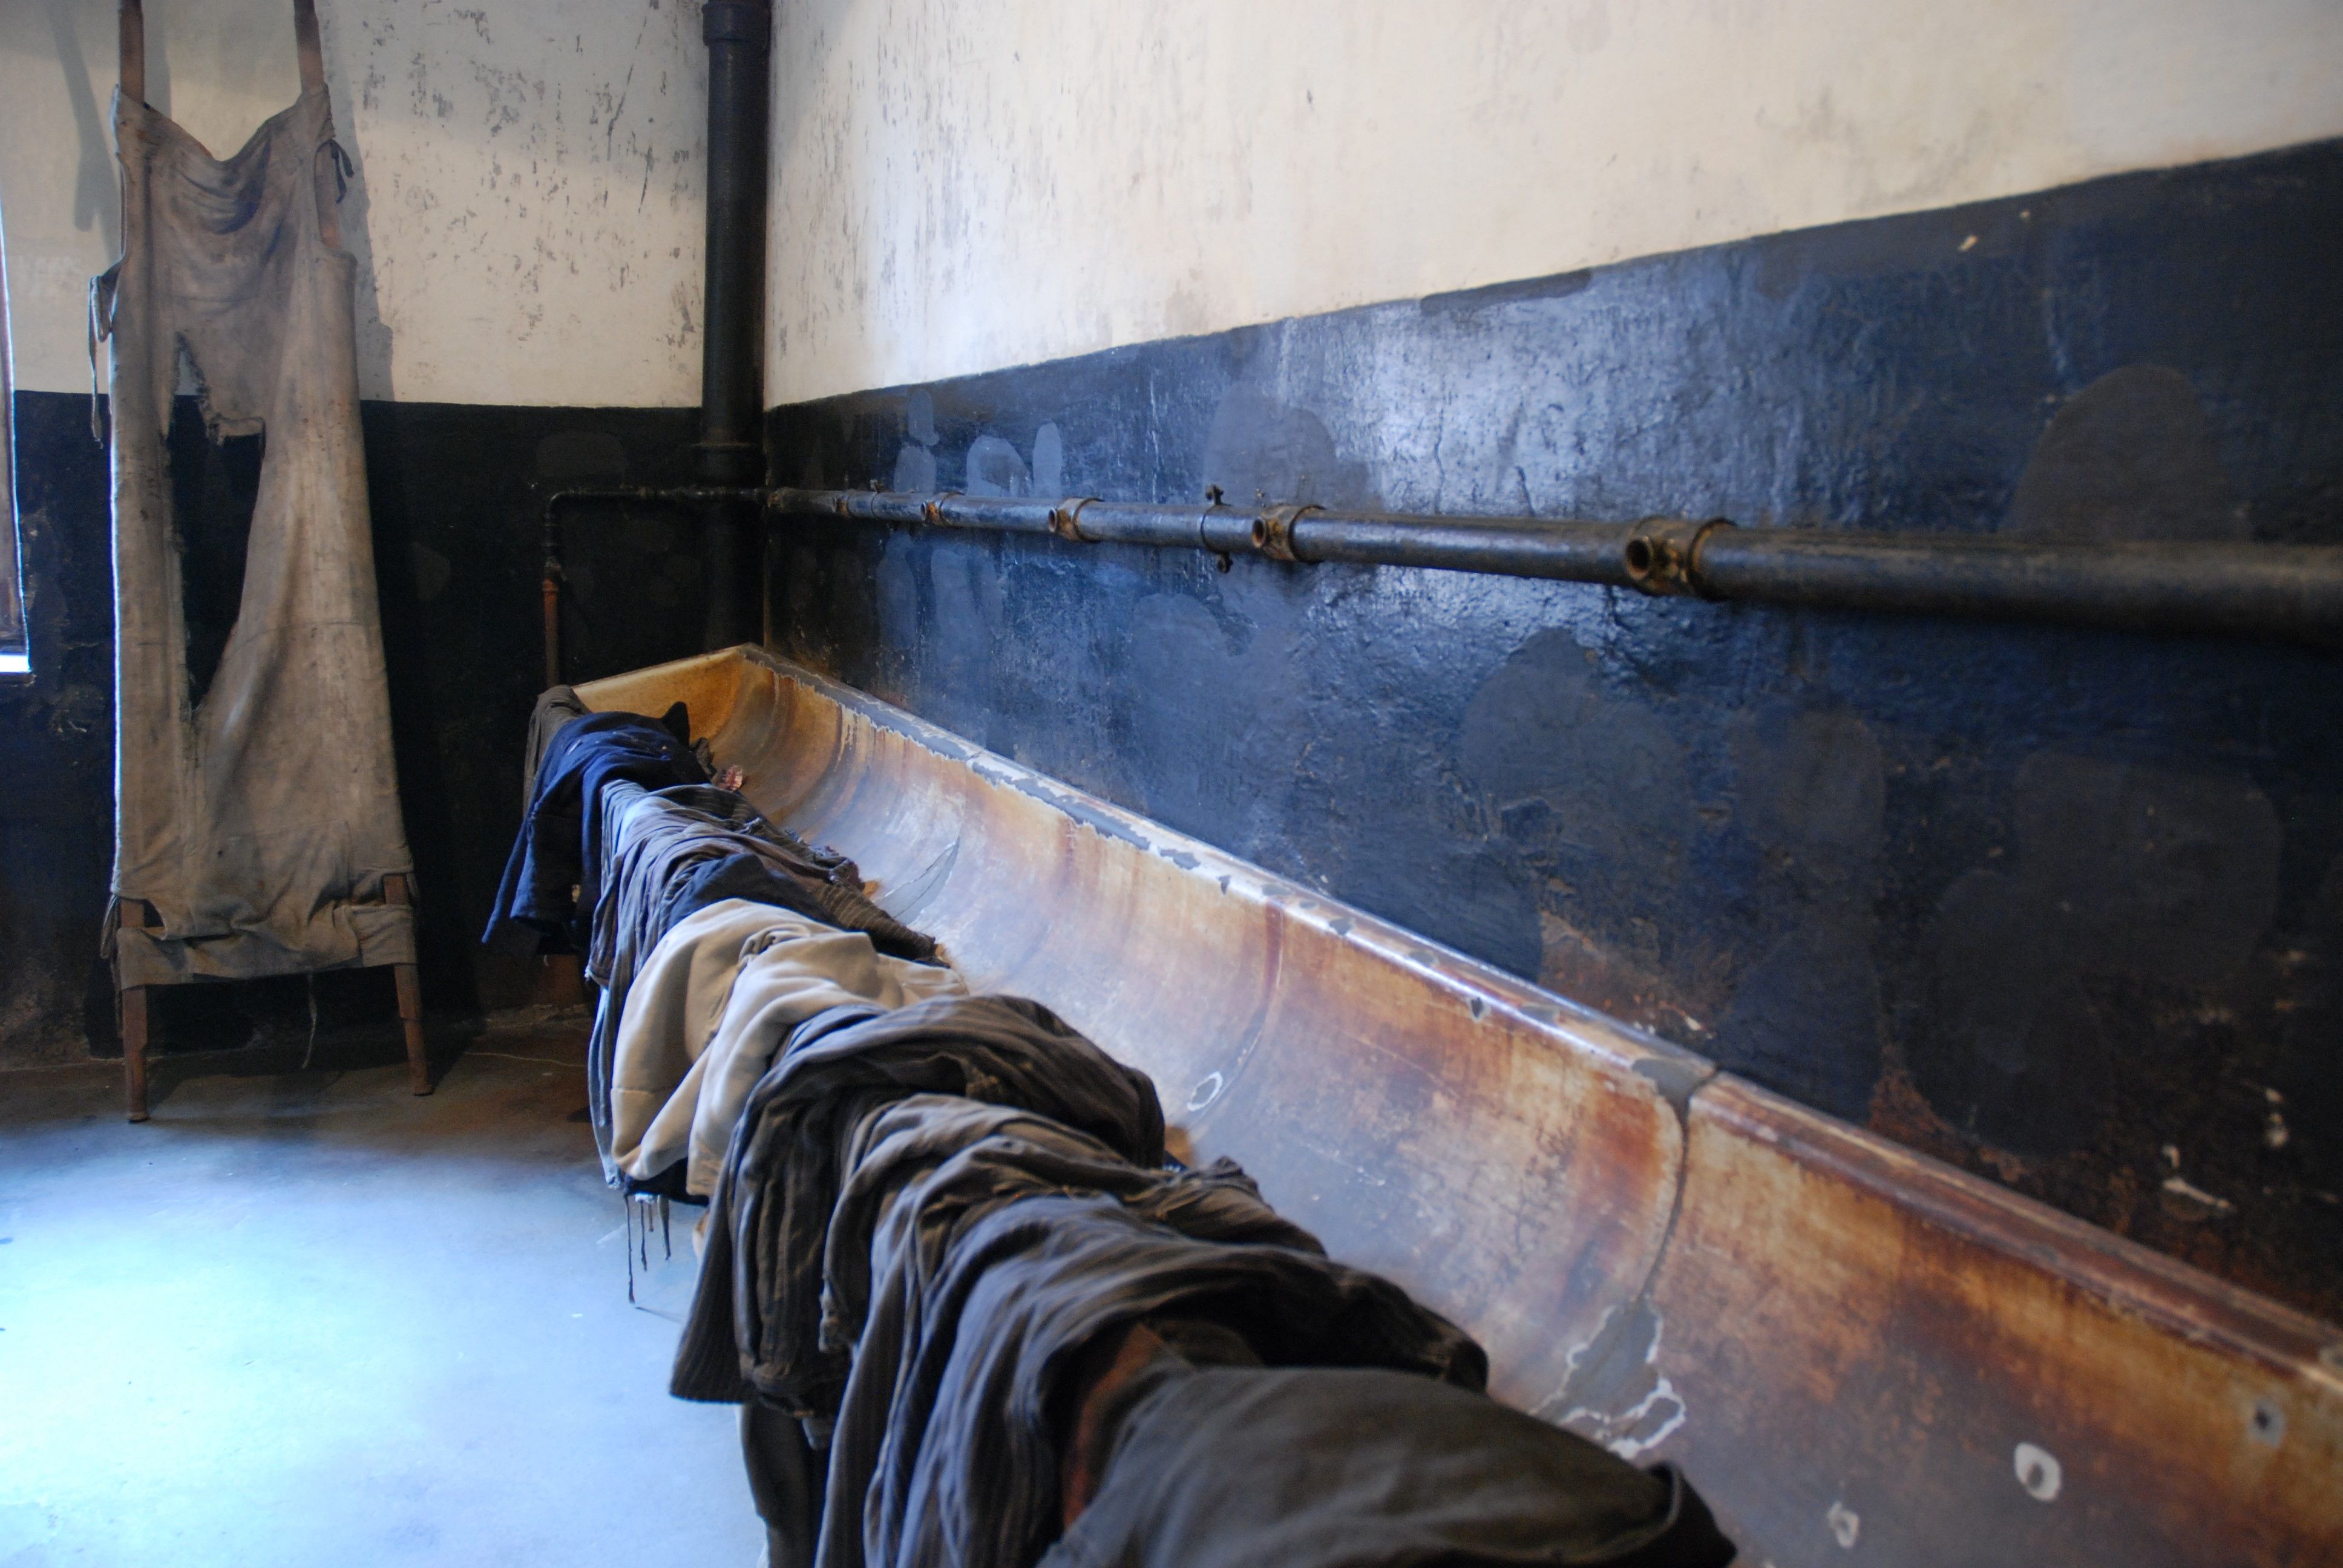 Changing room in block 11. On the left, a stretcher leaning against the wall. On the right, an oblong washbasin - with clothes hanging over it.